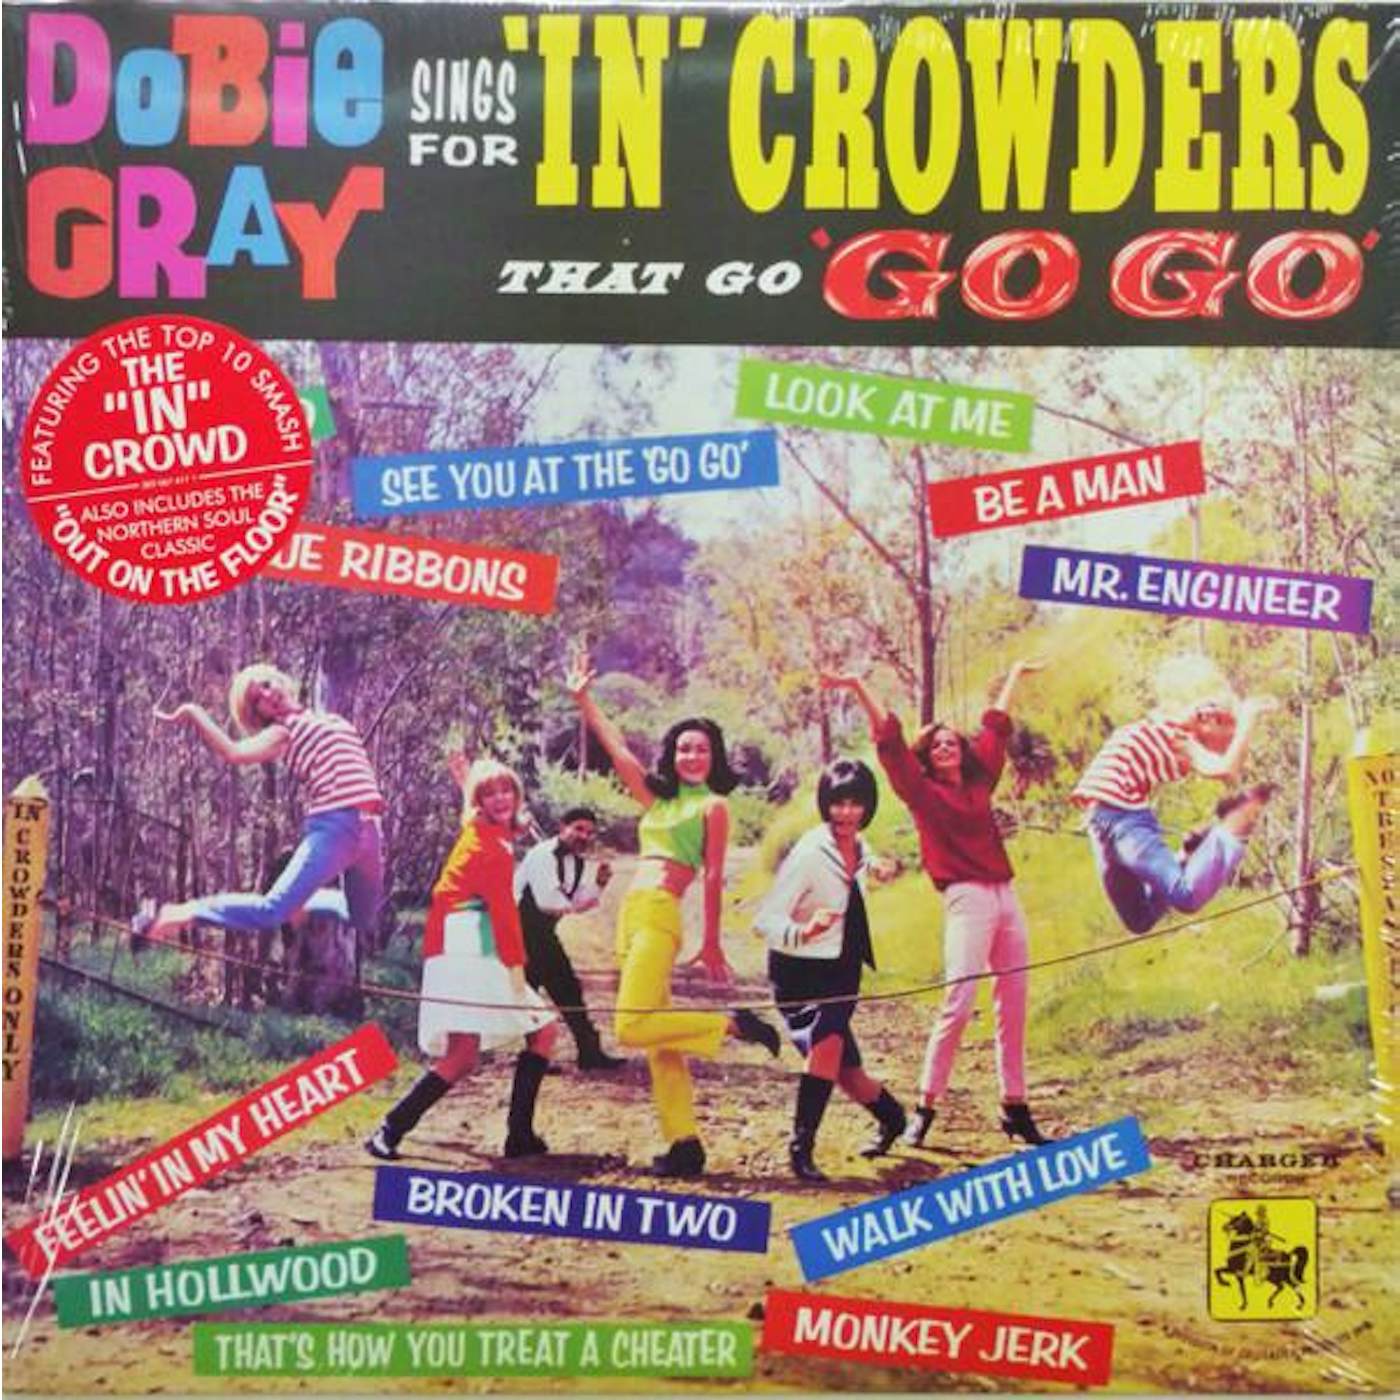 Dobie Gray SINGS FOR IN CROWDERS THAT GO GO-GO Vinyl Record